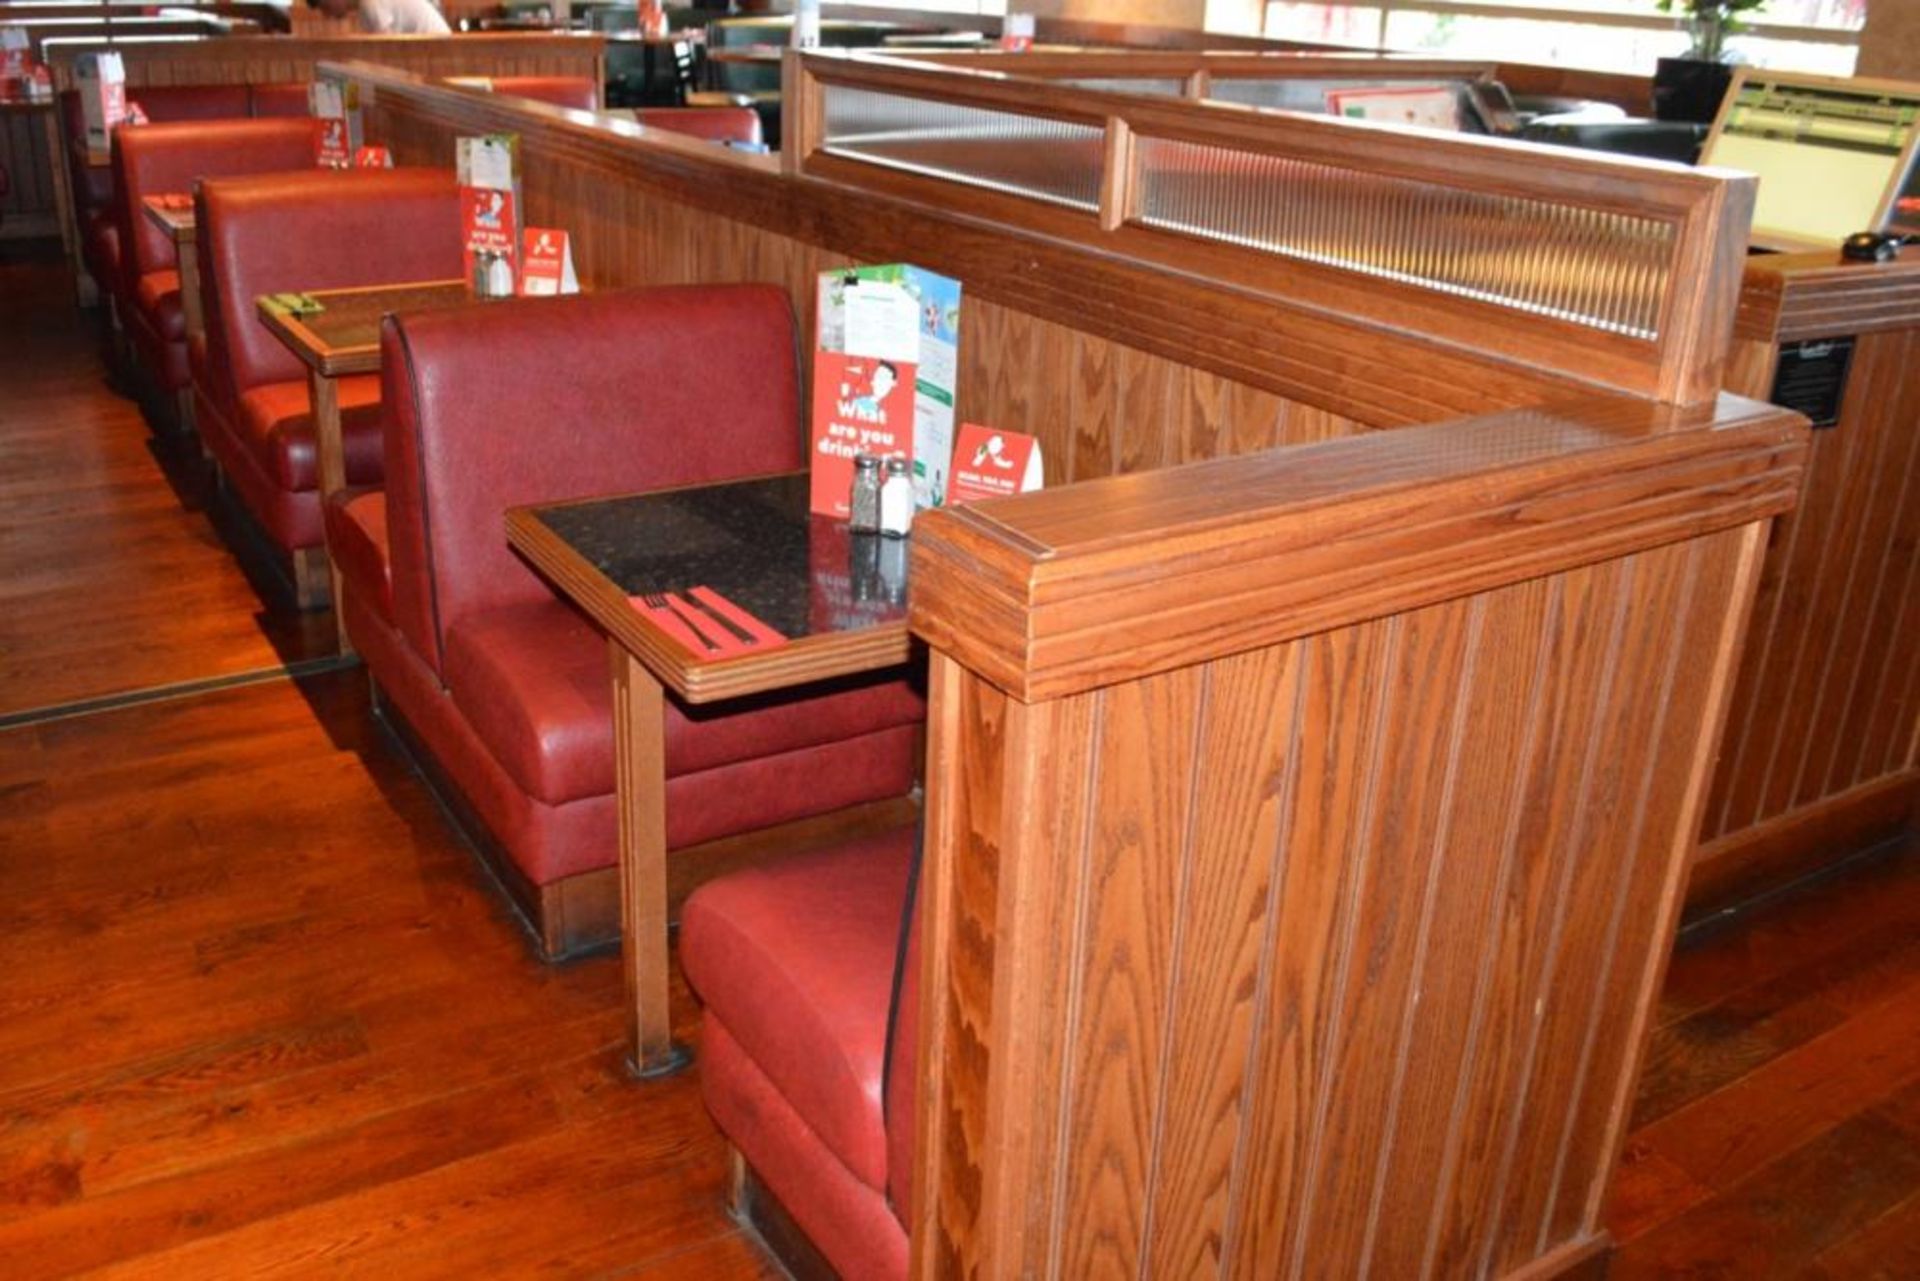 1 x Selection of Cosy Bespoke Seating Booths in a 1950's Retro American Diner Design With Dining Tab - Image 17 of 30